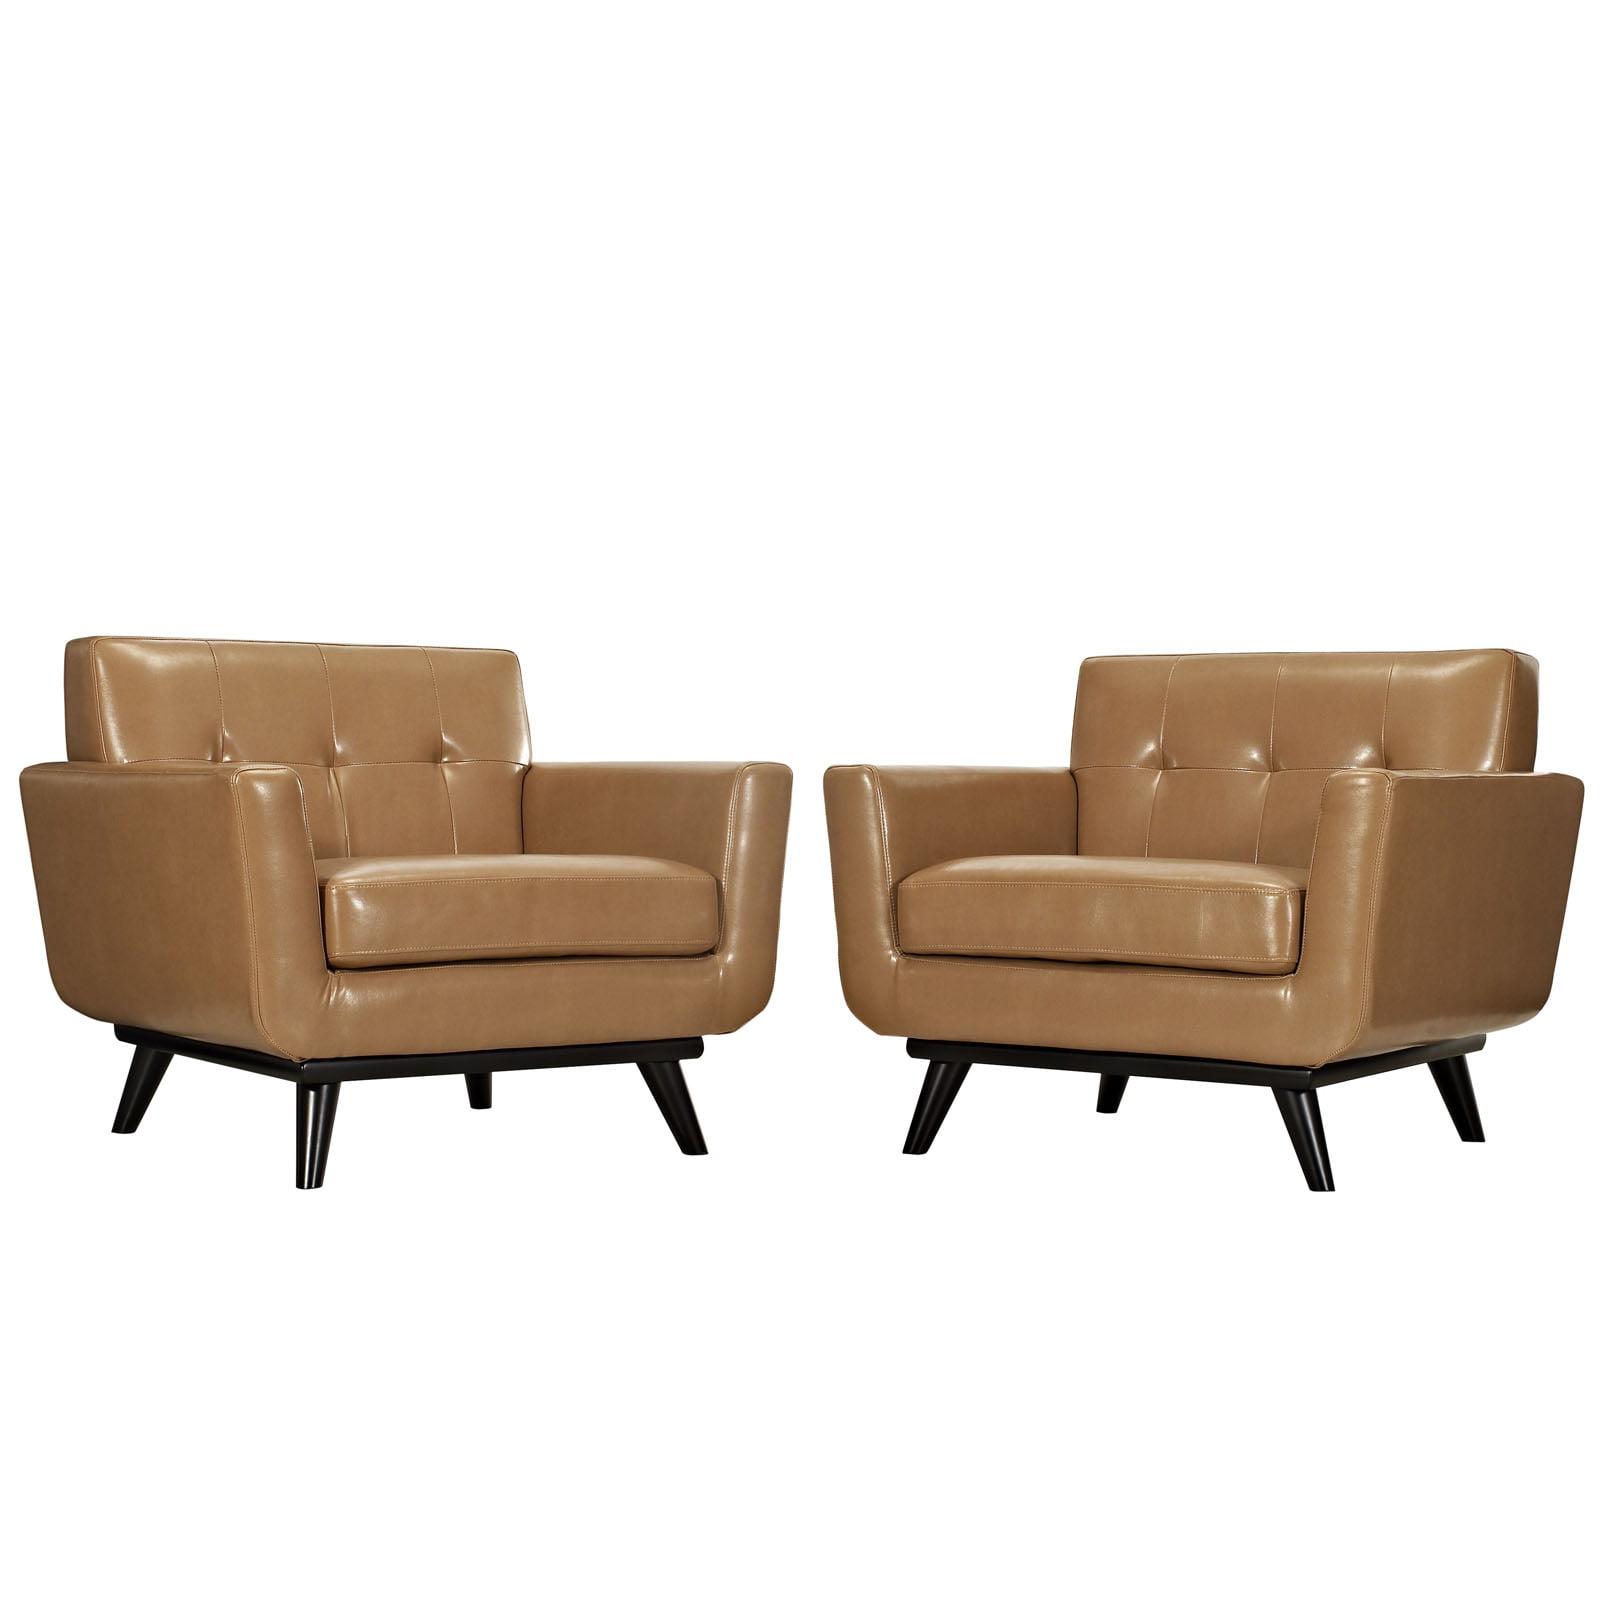 Engage 80'' Tan Leather Sofa with Rubberwood Legs